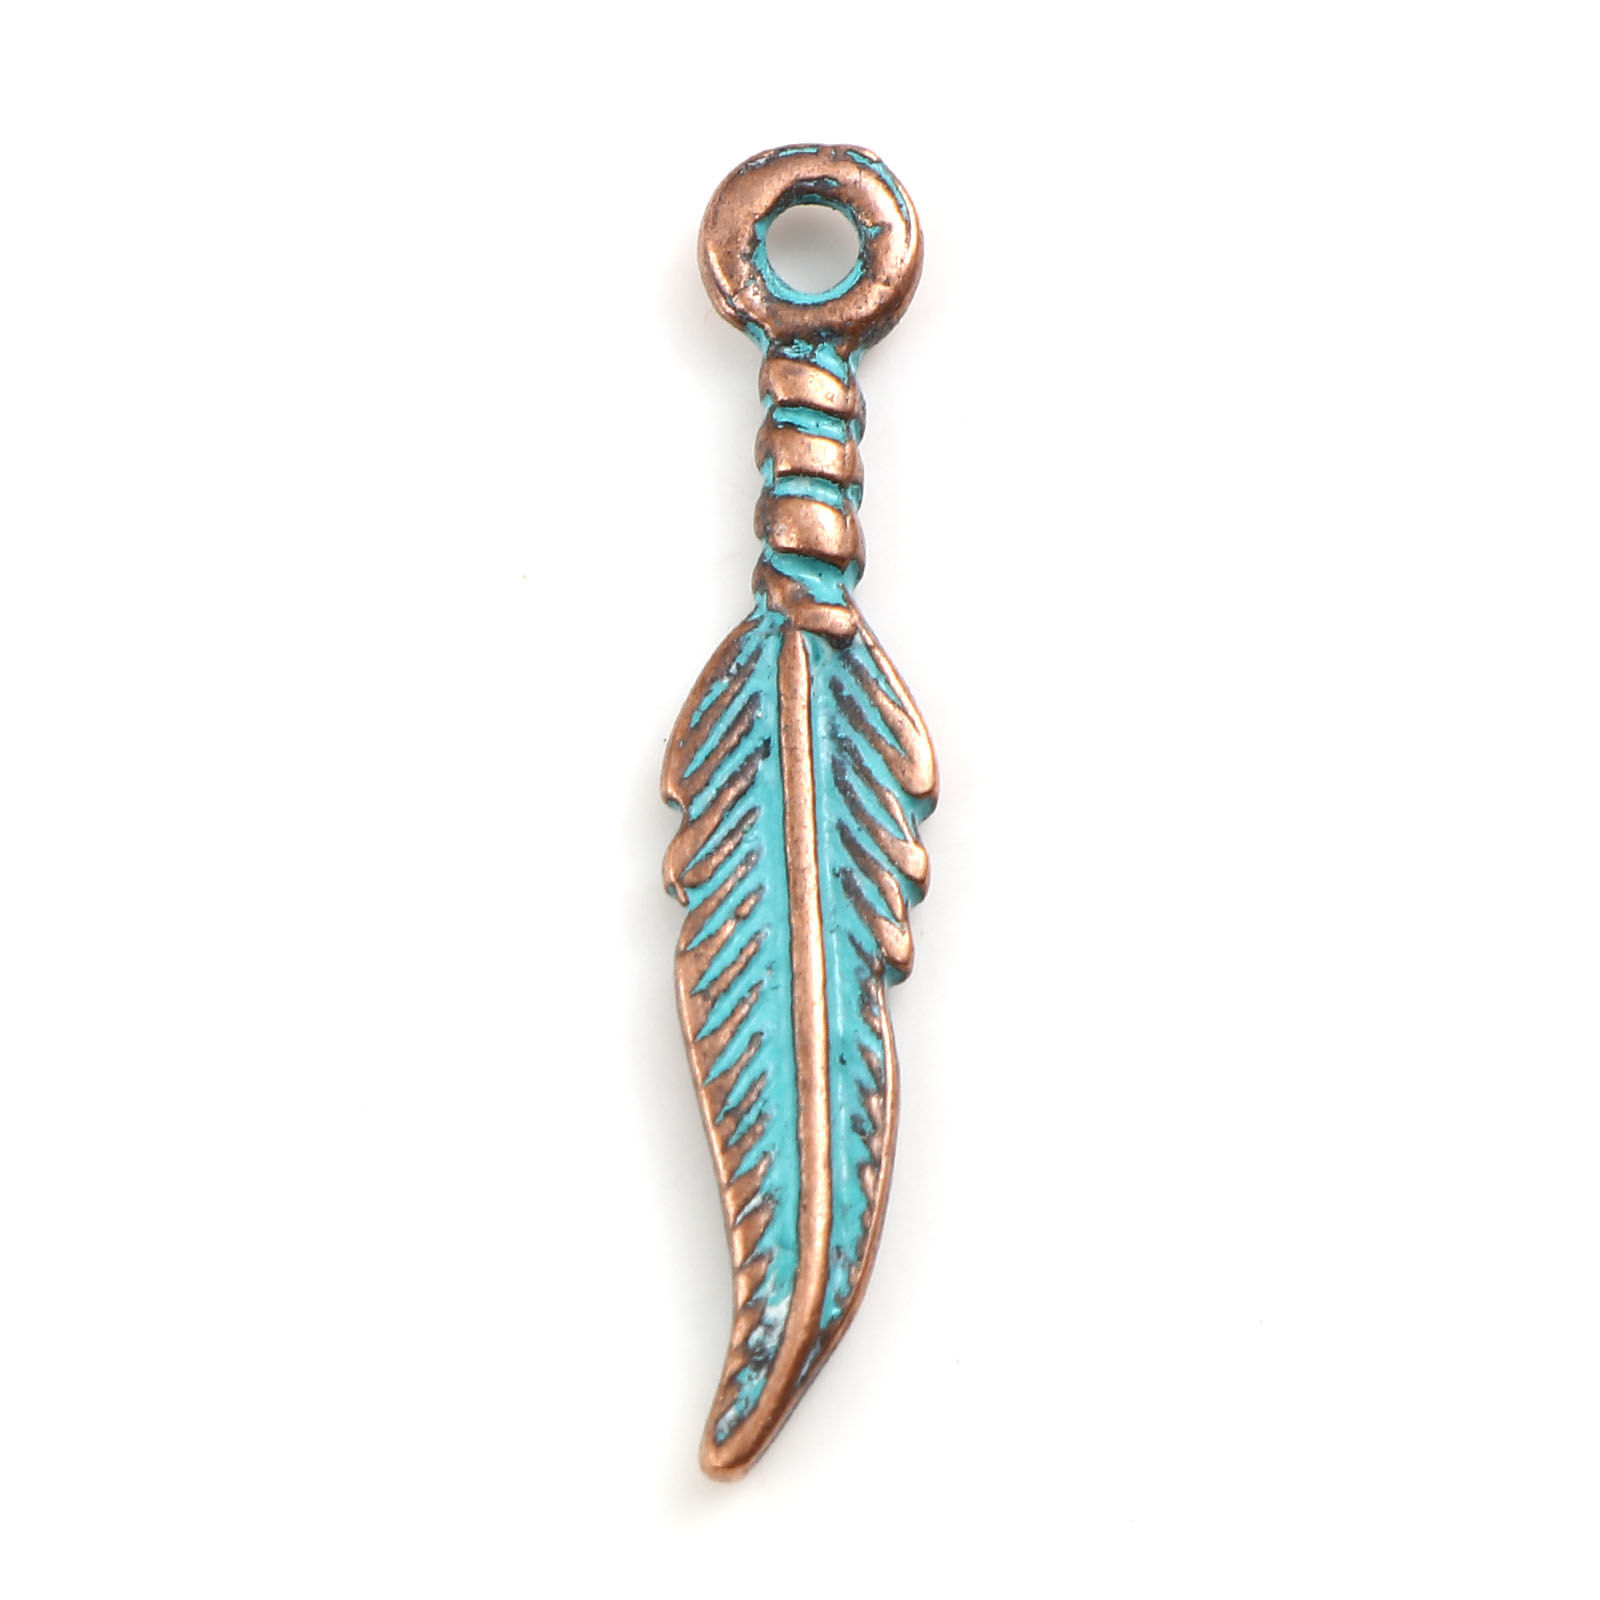 Picture of Zinc Based Alloy Charms Feather Antique Copper Patina 27mm x 5mm, 10 PCs